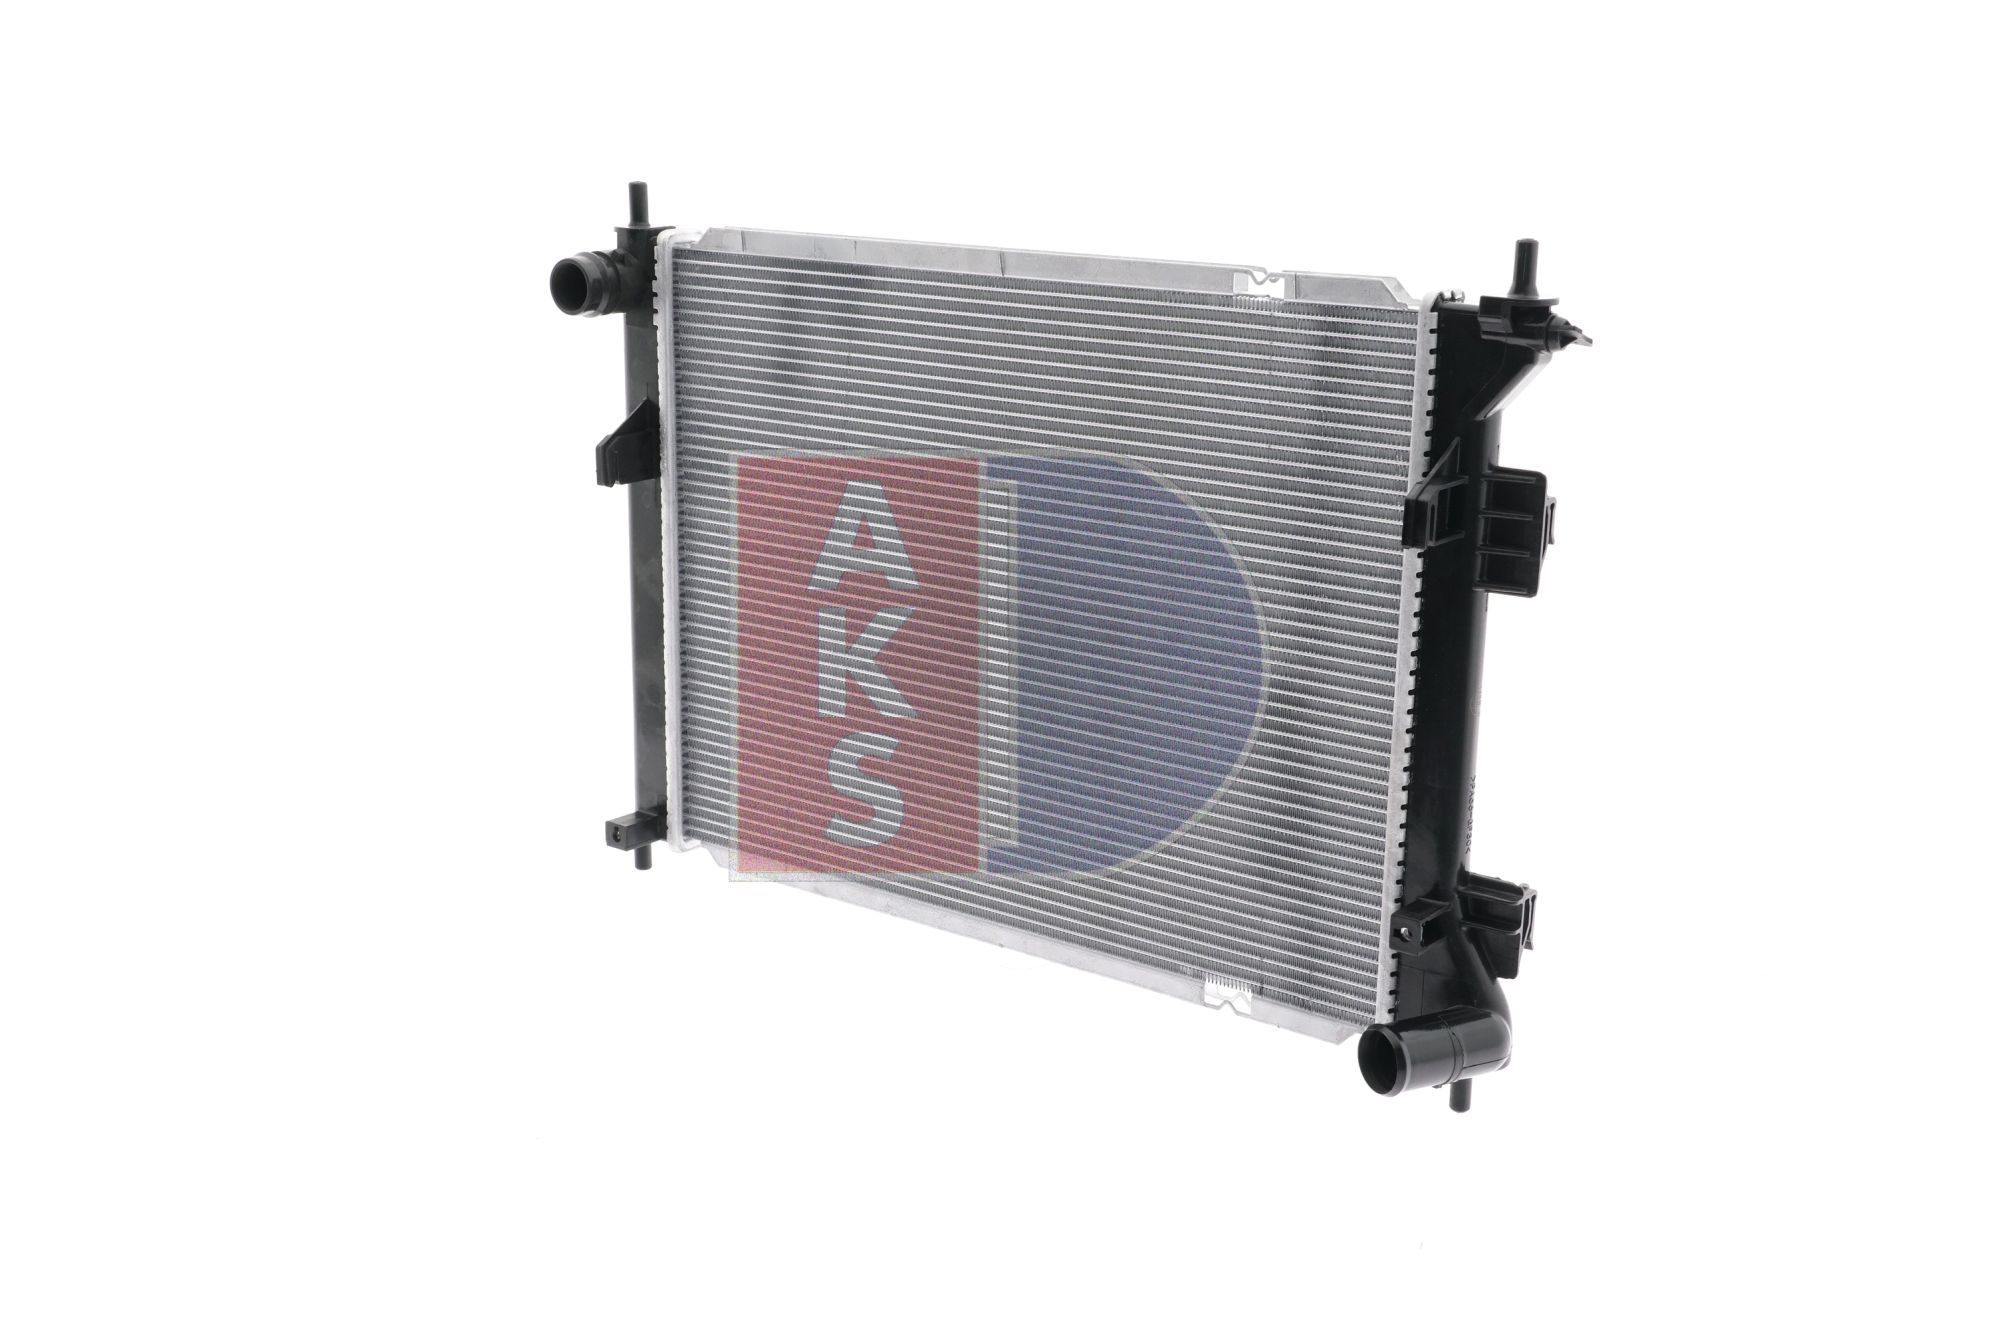 510189N AKS DASIS Radiators HYUNDAI for vehicles with/without air conditioning, 500 x 374 x 16 mm, Manual Transmission, Brazed cooling fins